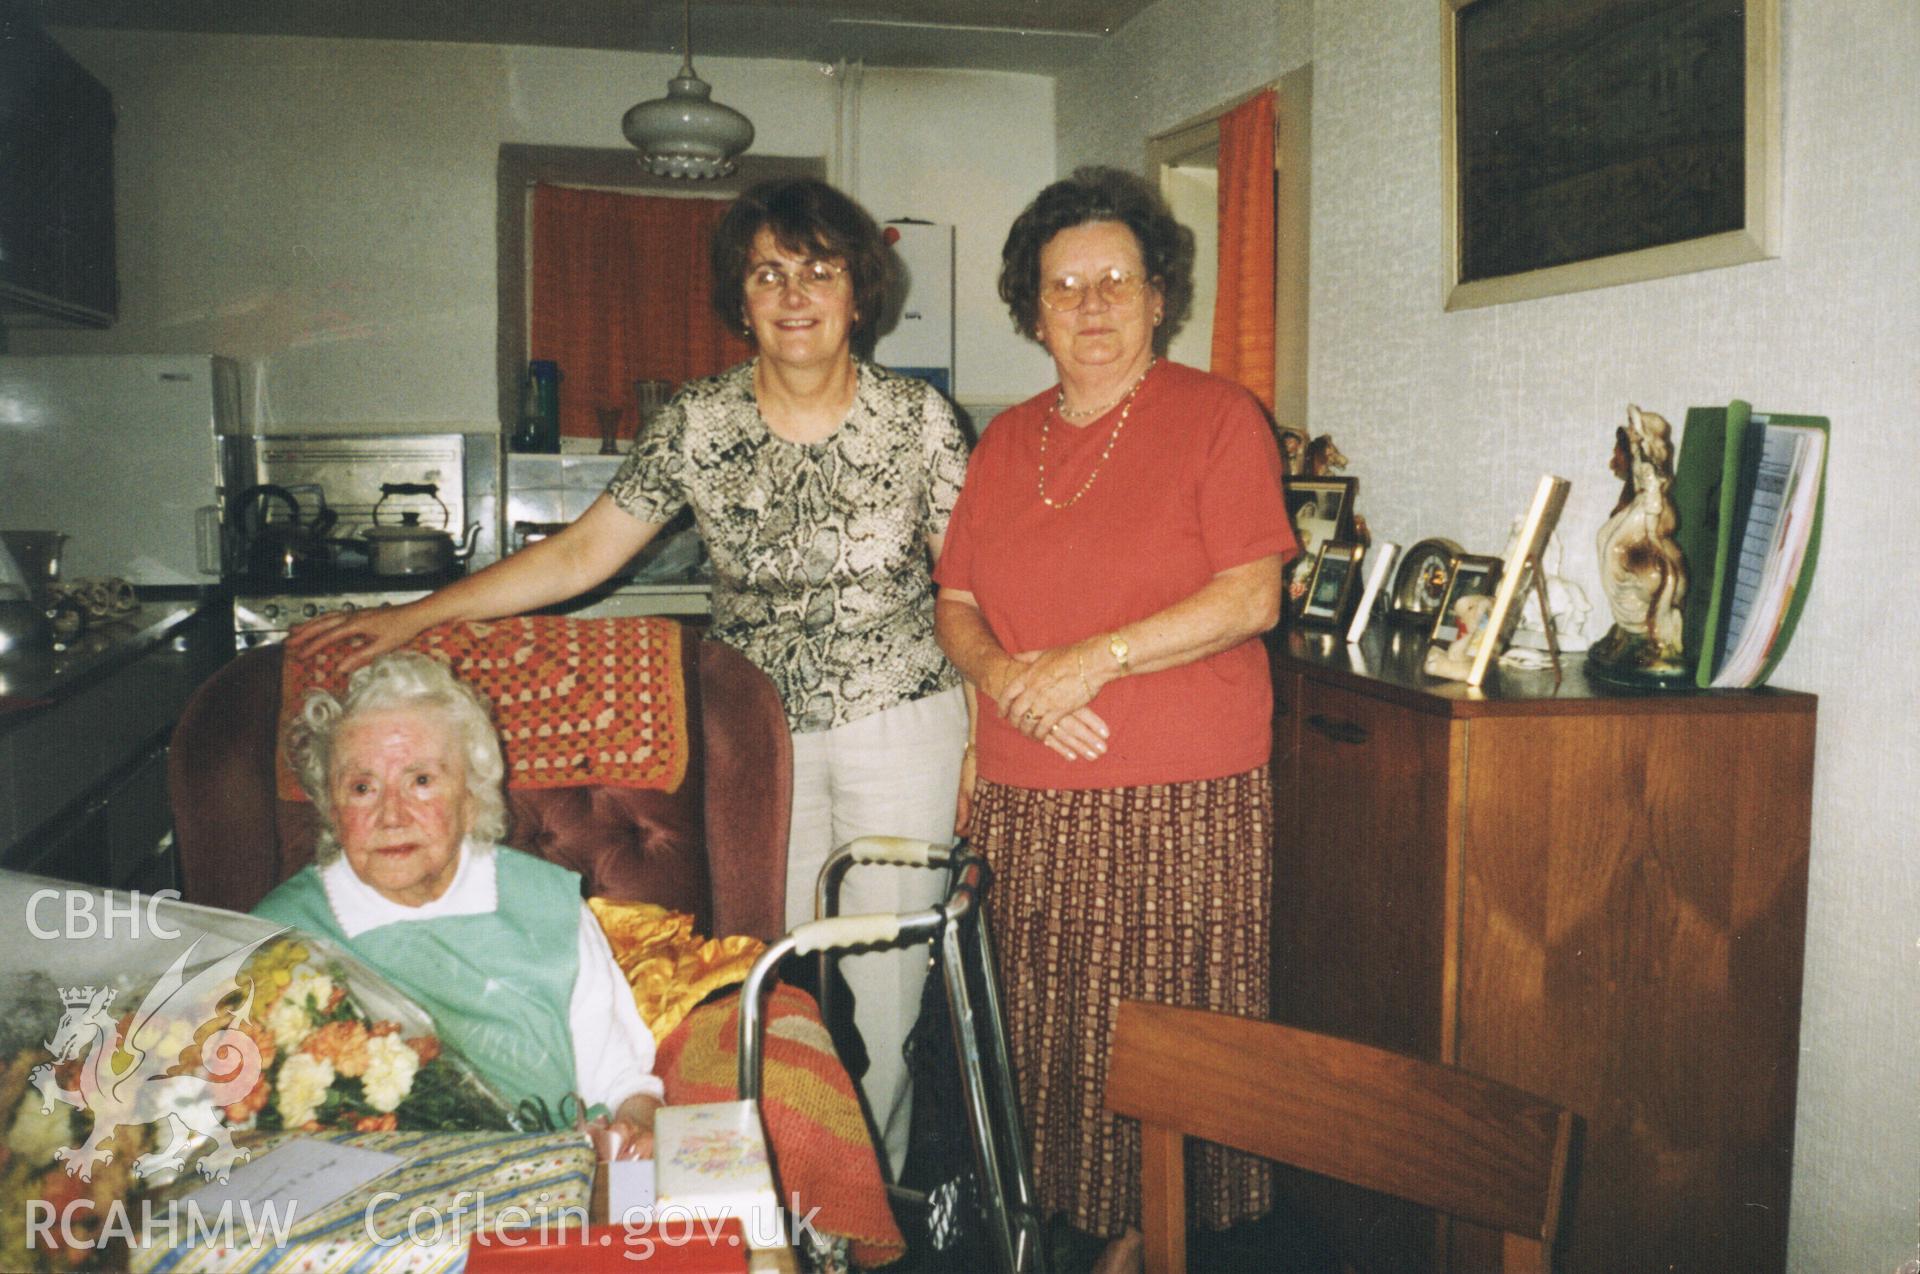 Colour photograph of 90th birthday of Mrs Elen Jones with Catherine Jones and the Deacon, Nesta Williams who was a Minister's wife. Donated as part of the Digital Dissent Project.